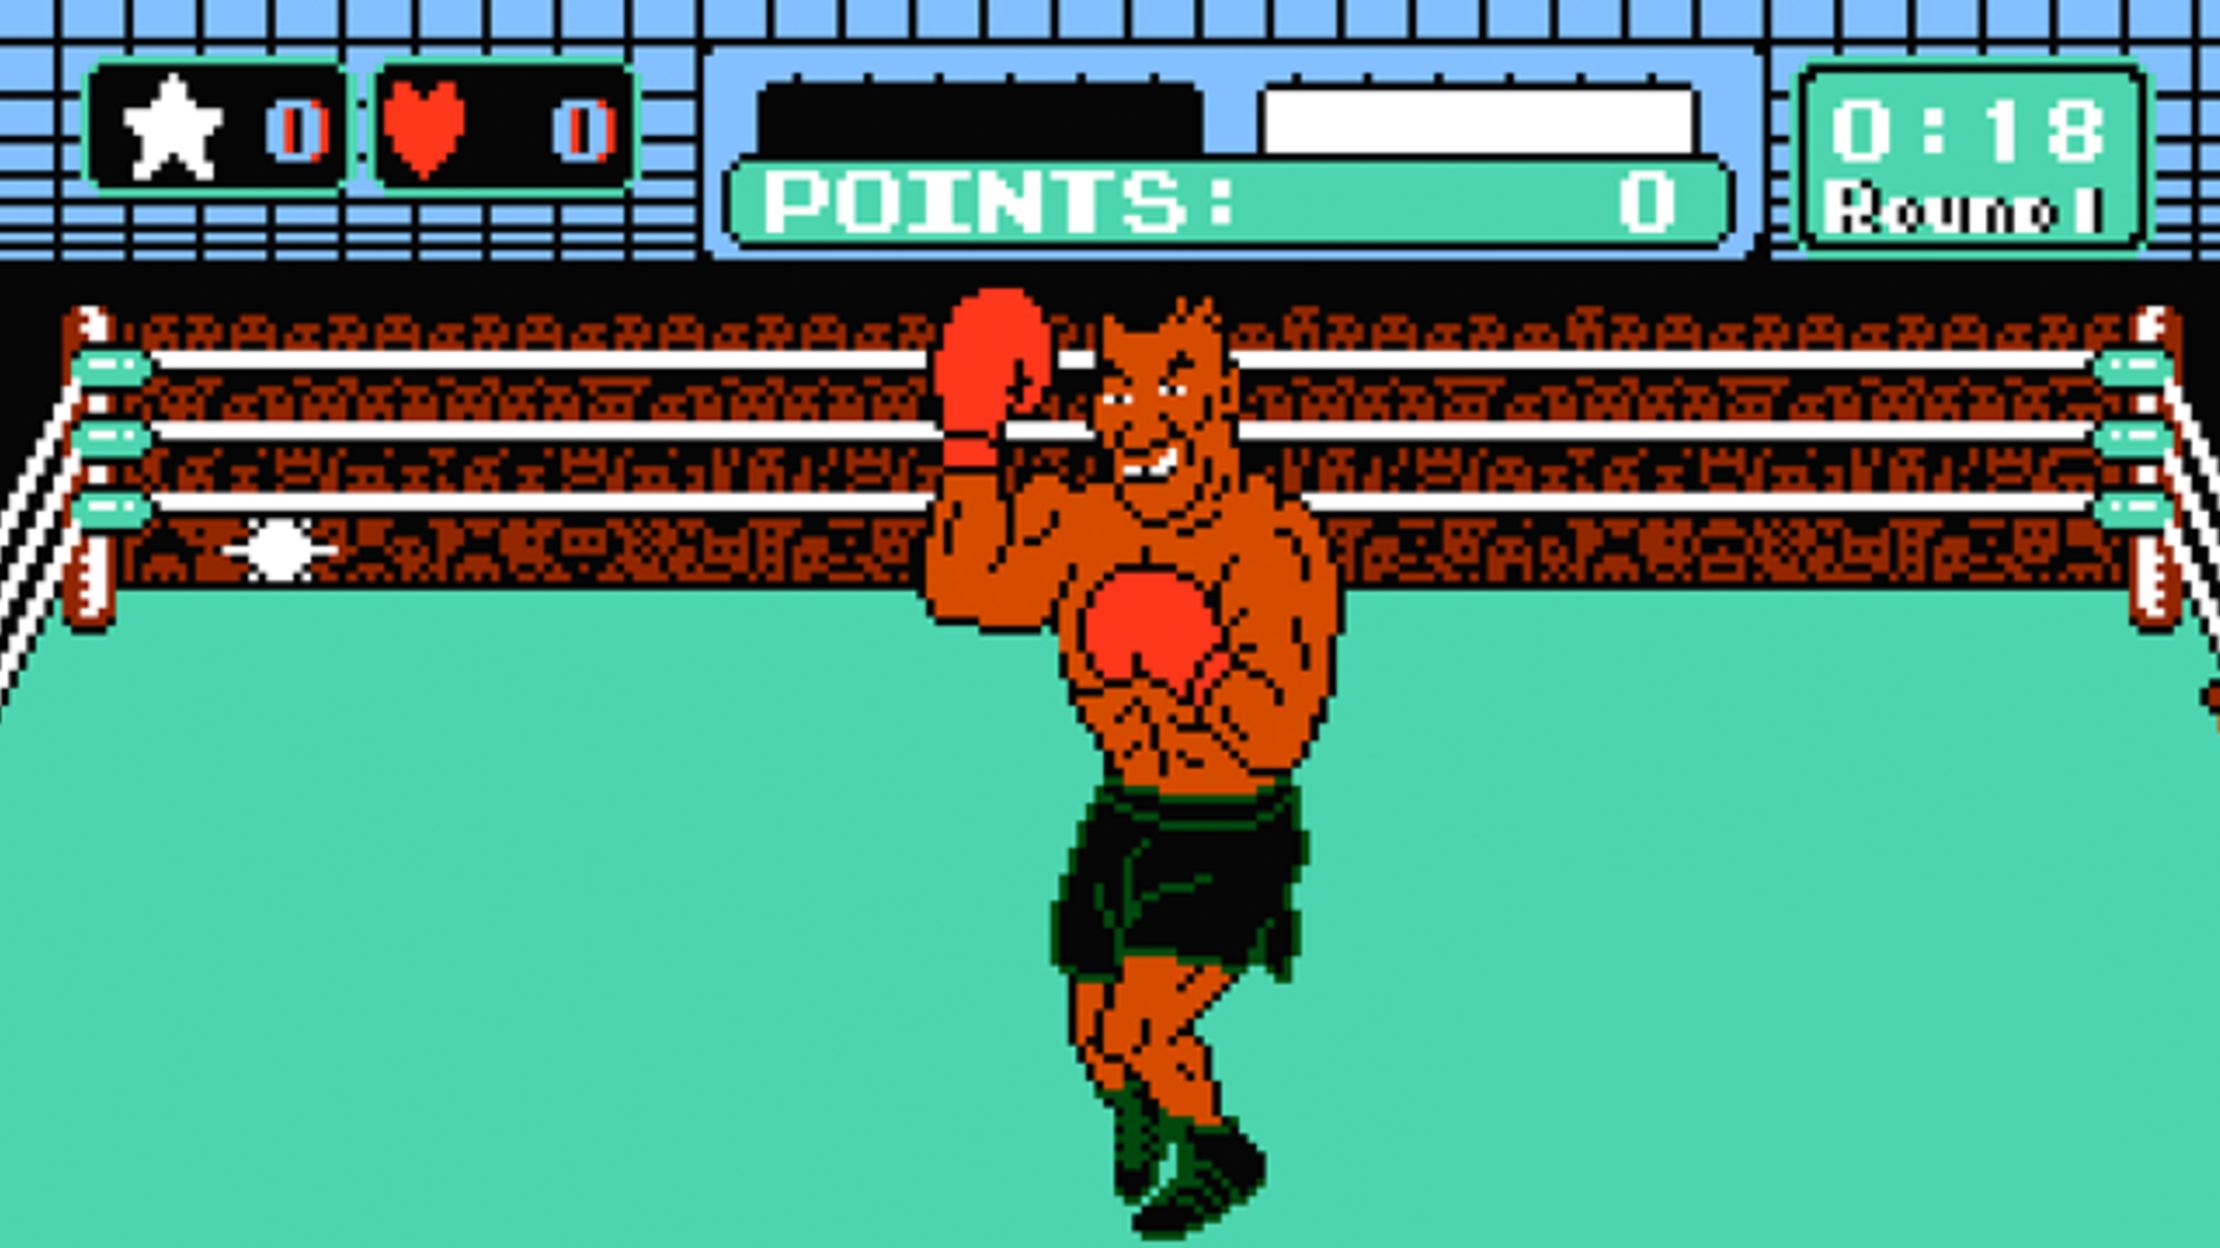 dumb video game cheats - Mike Tyson’s Punch-Out video game screenshot